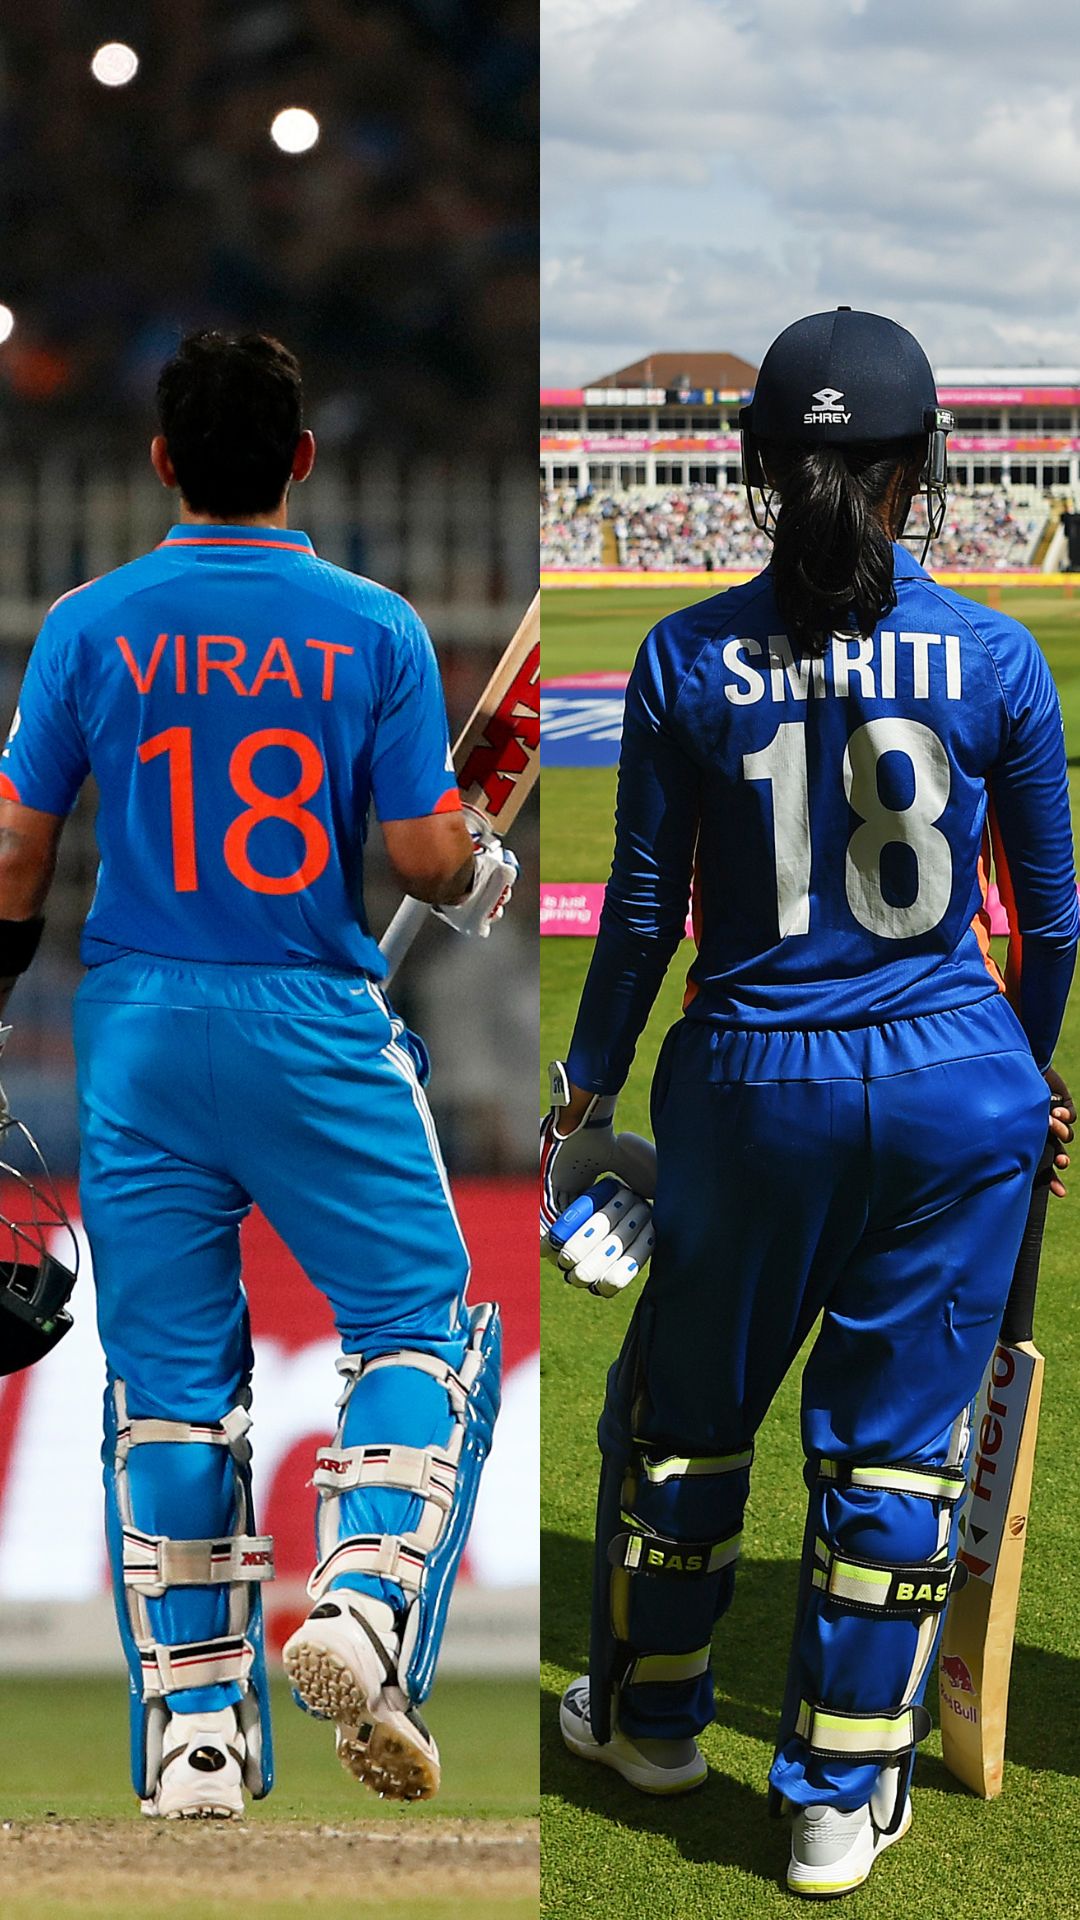 Male and female international cricketers with same jersey numbers